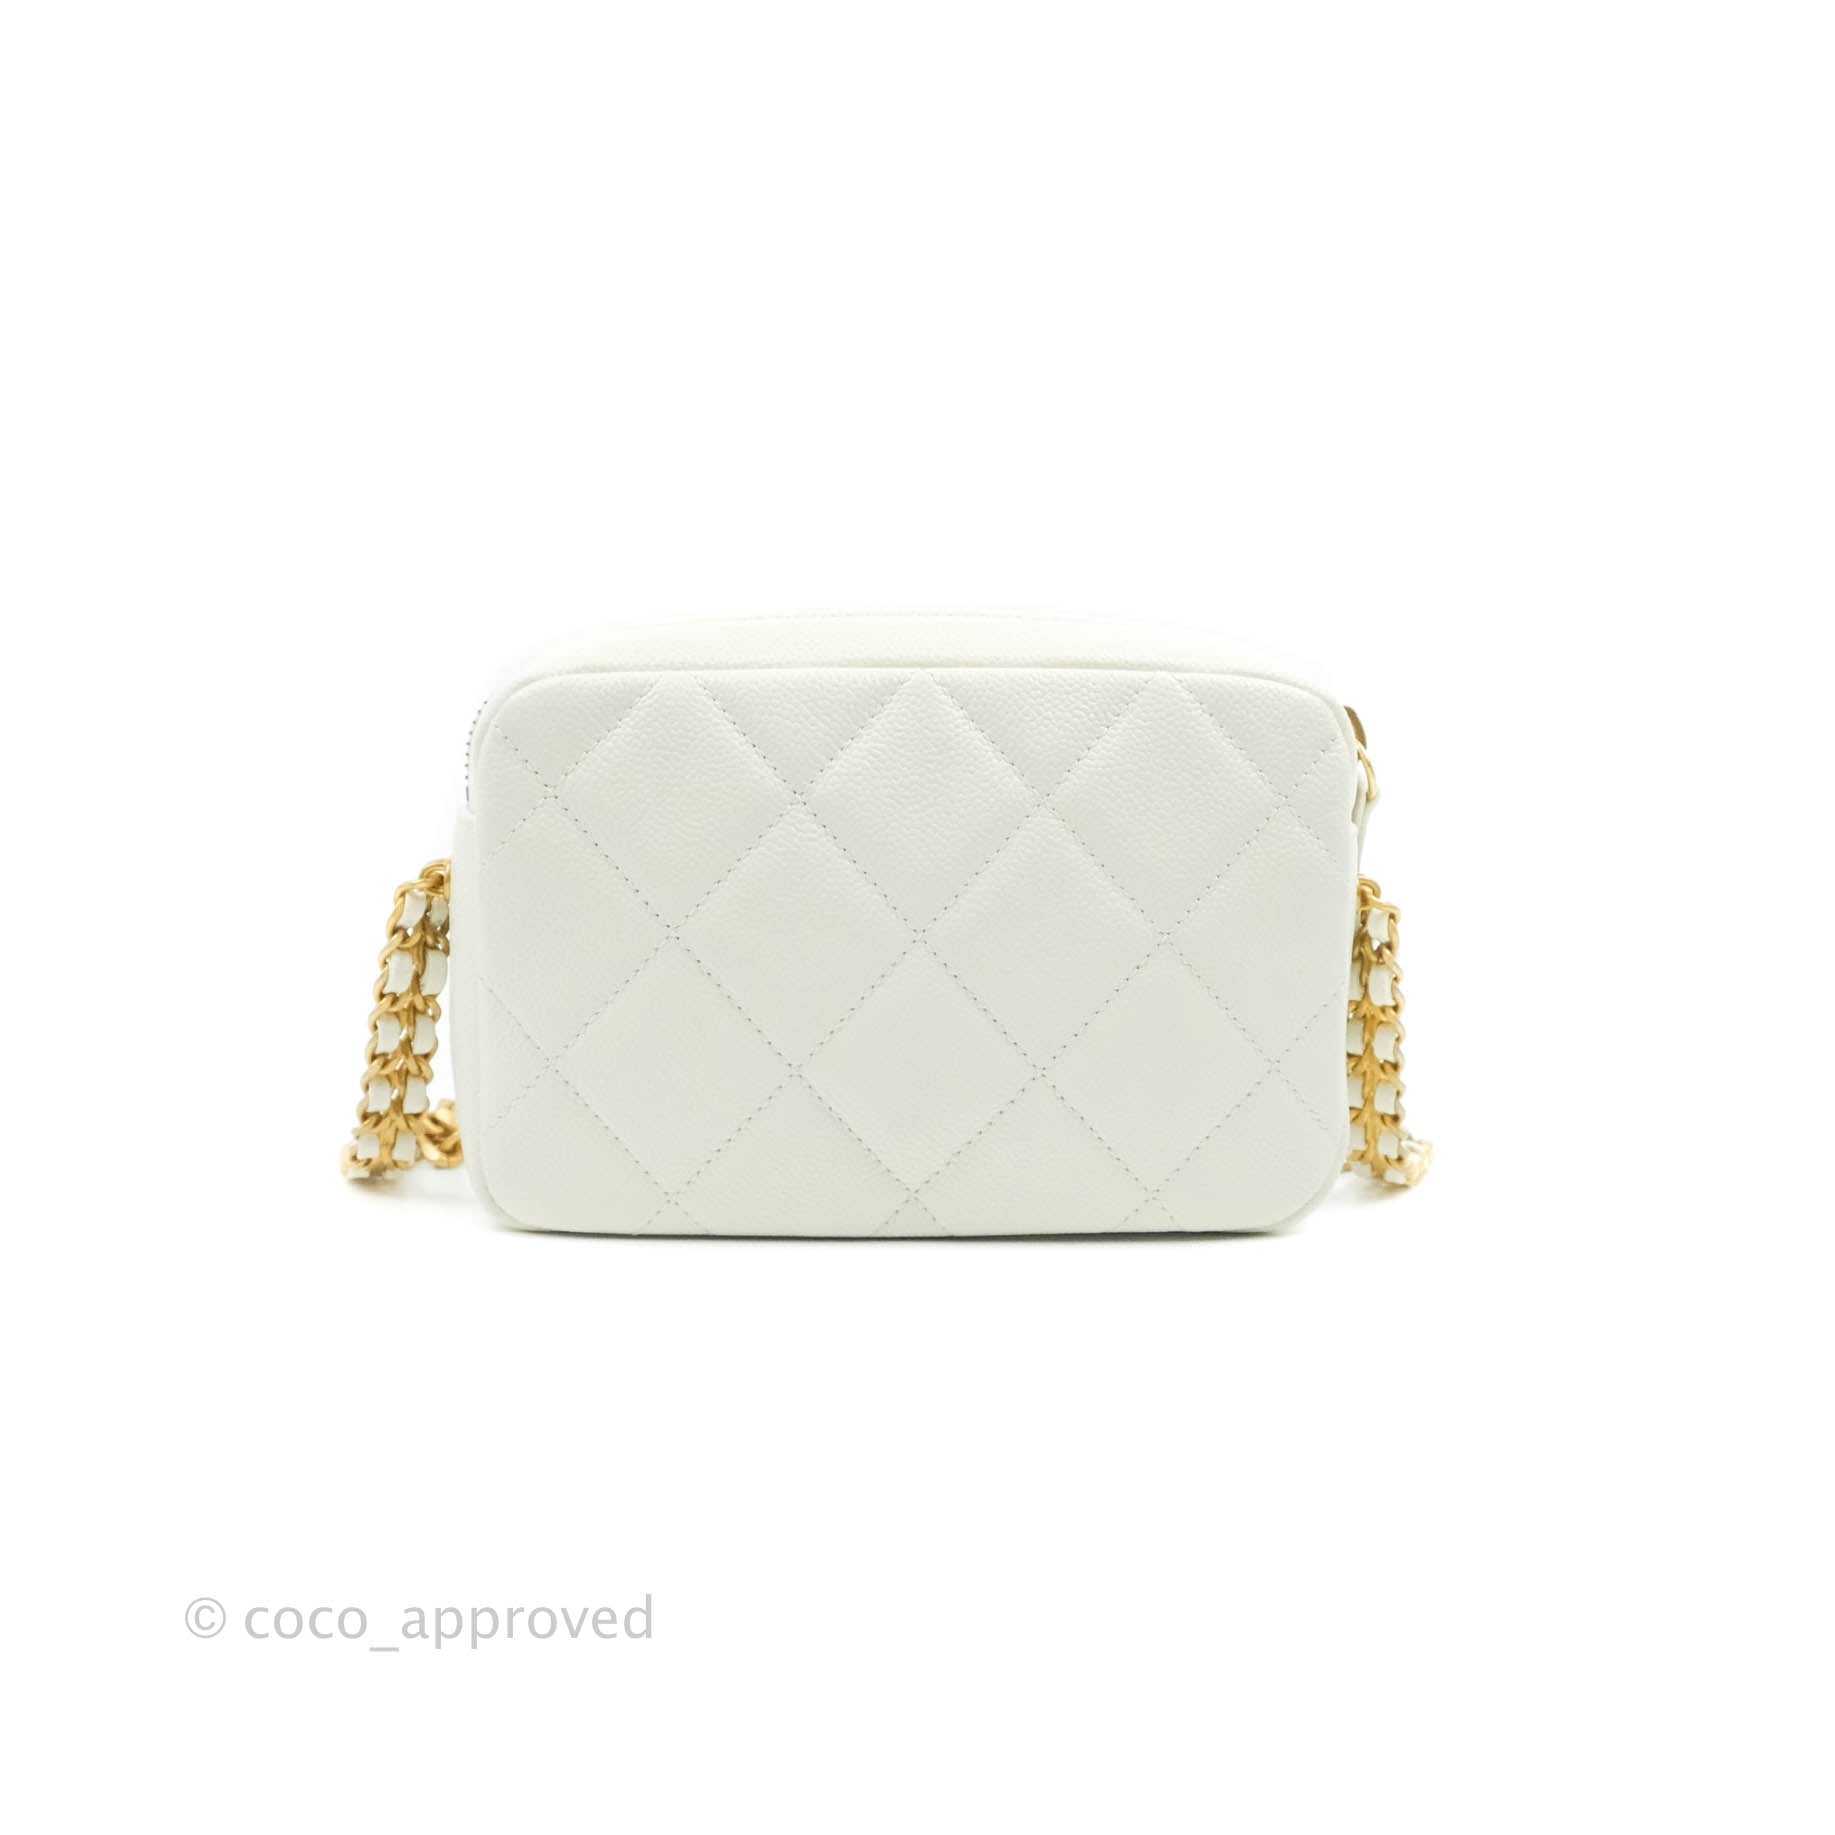 CHANEL Small Chain-Link Quilted Camera Bag OUTLET FINAL SALE